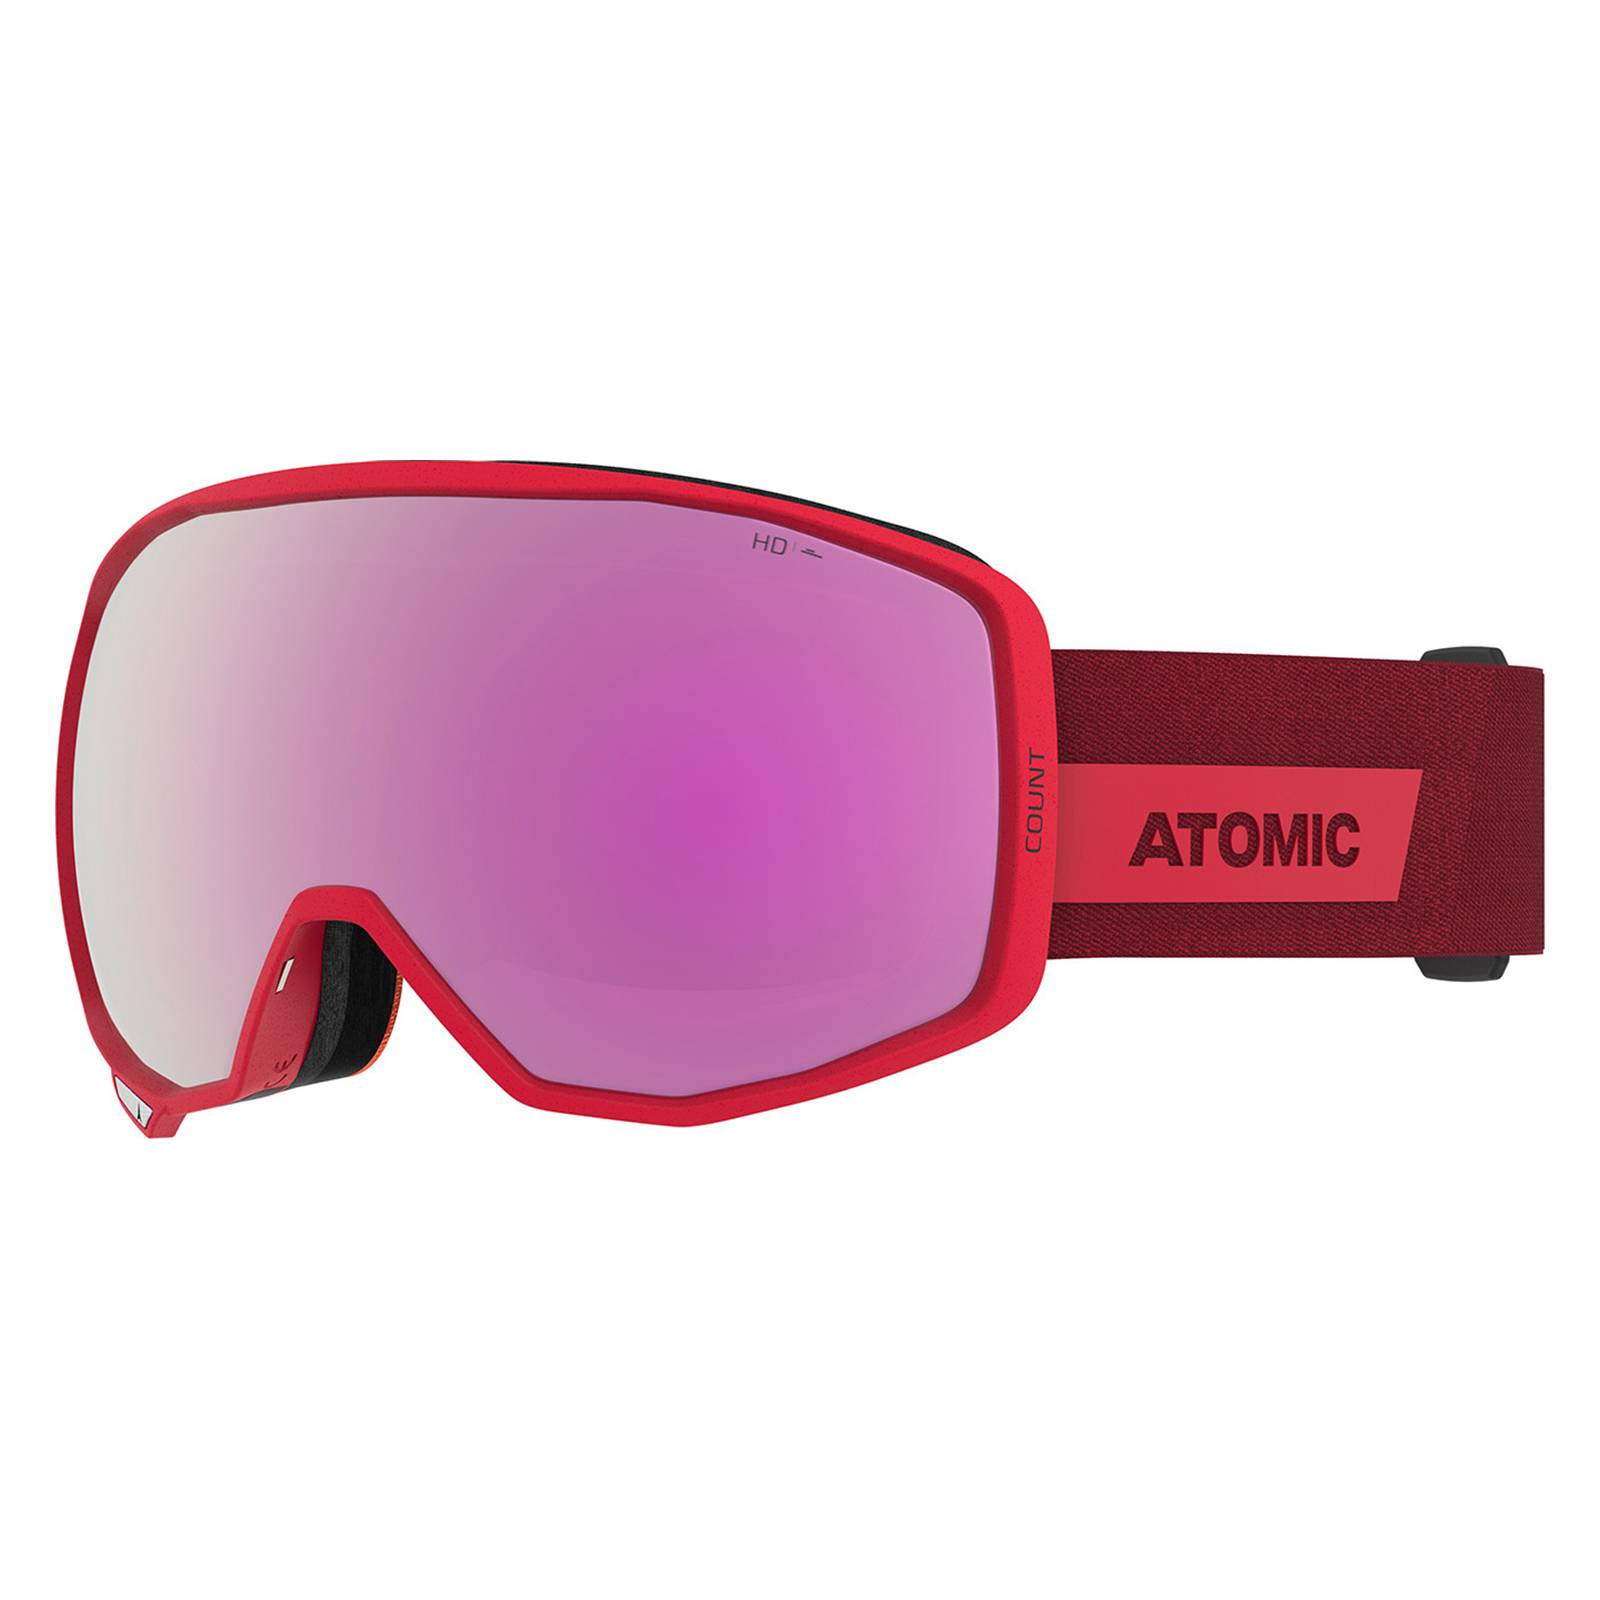 ATOMIC Count HD Skibrille rot